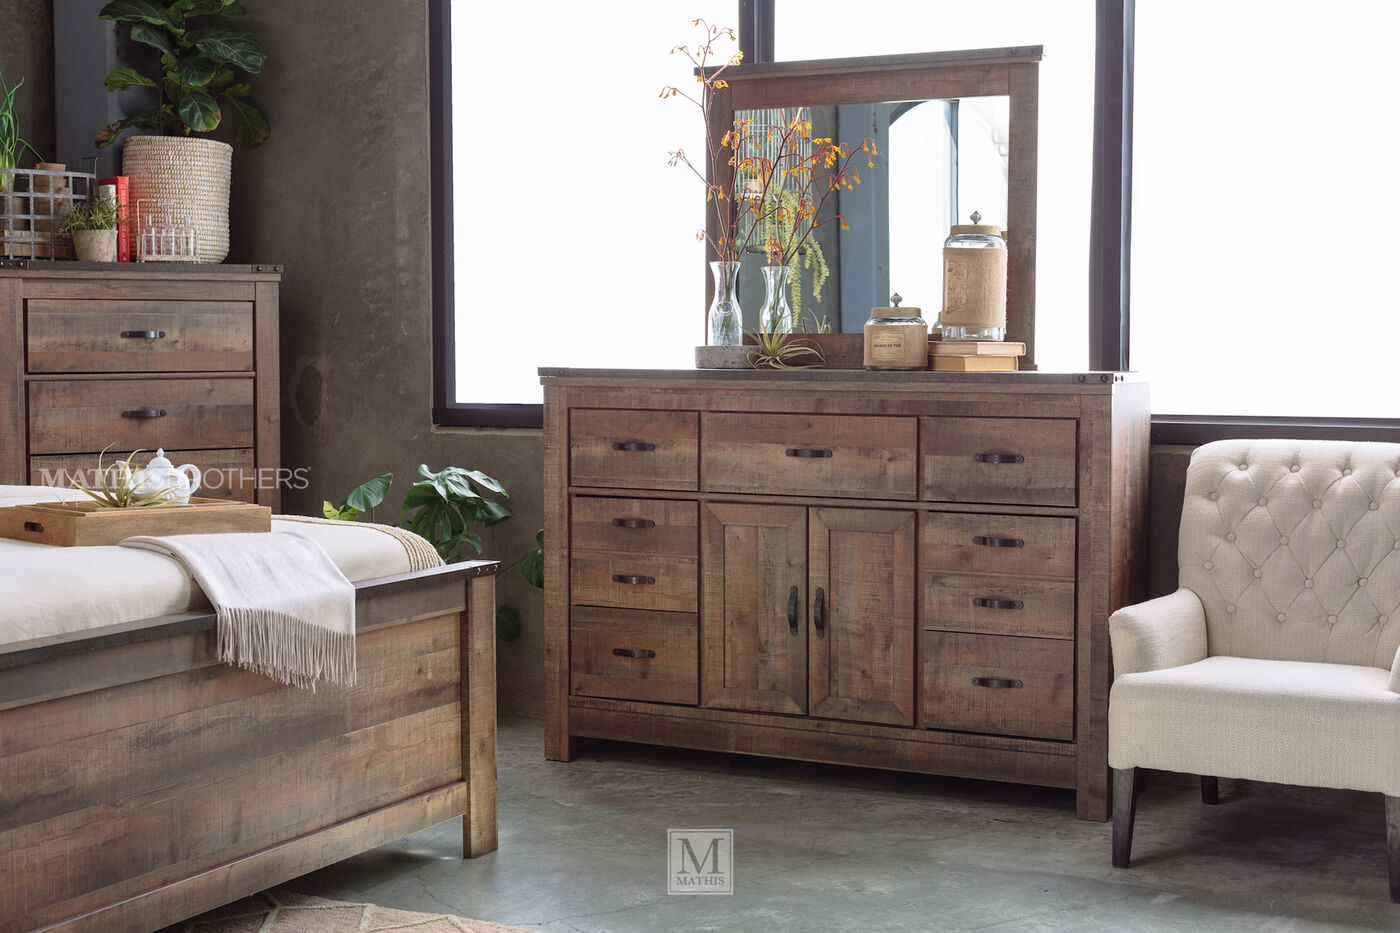 Four-Piece Rustic Farmhouse Bedroom Set in Brown | Mathis Brothers Furniture